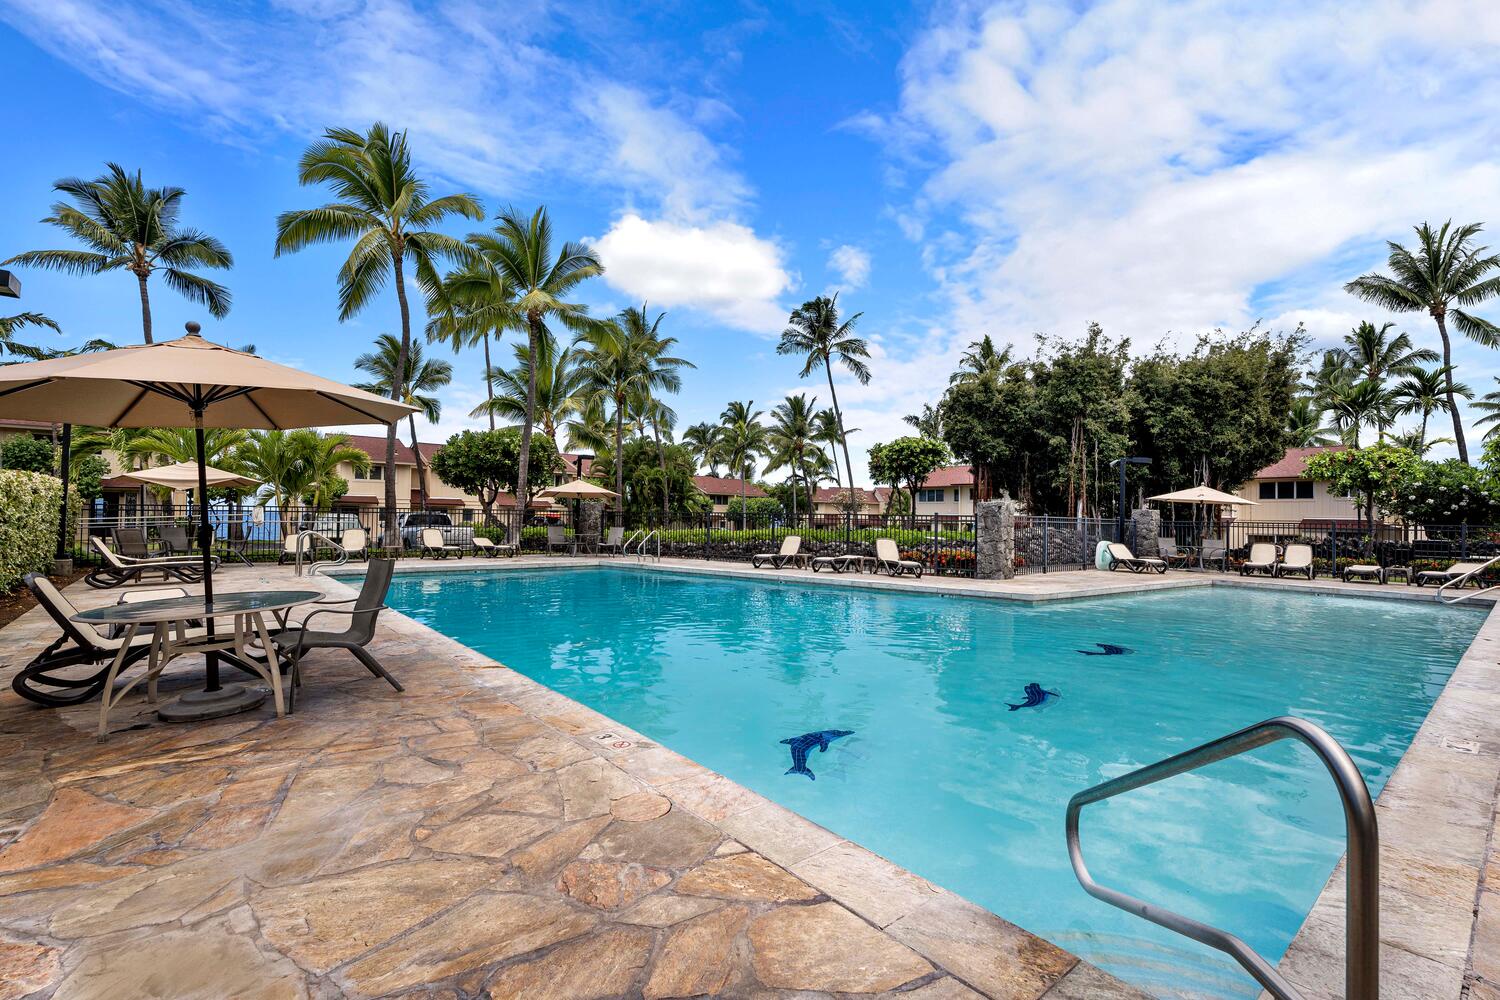 Kailua Kona Vacation Rentals, Keauhou Kona Surf & Racquet 1104 - Take a refreshing dip in the pristine pool – your personal oasis for relaxation and fun under the sun.